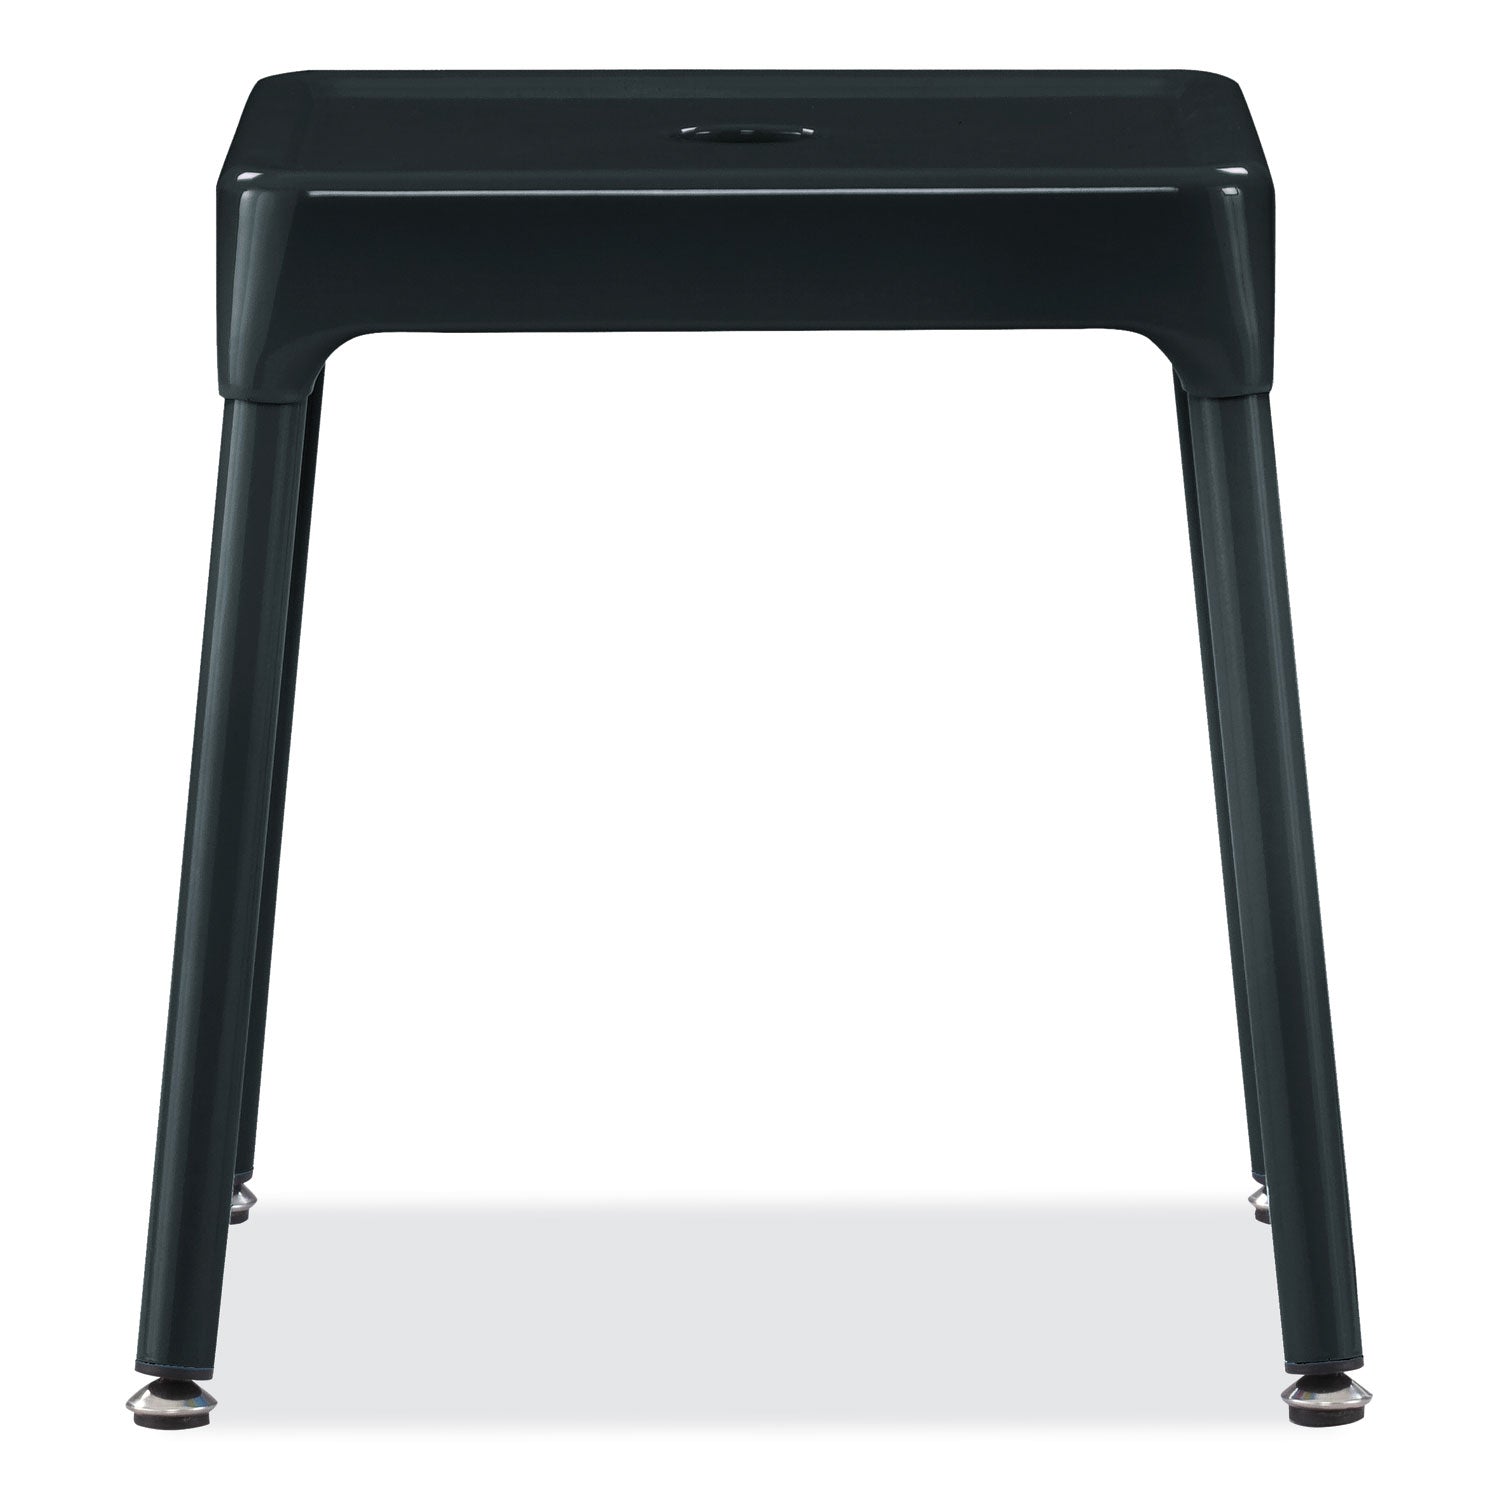 steel-guest-stool-backless-supports-up-to-275-lb-15-to-155-seat-height-black-seat-base-ships-in-1-3-business-days_saf6603bl - 2